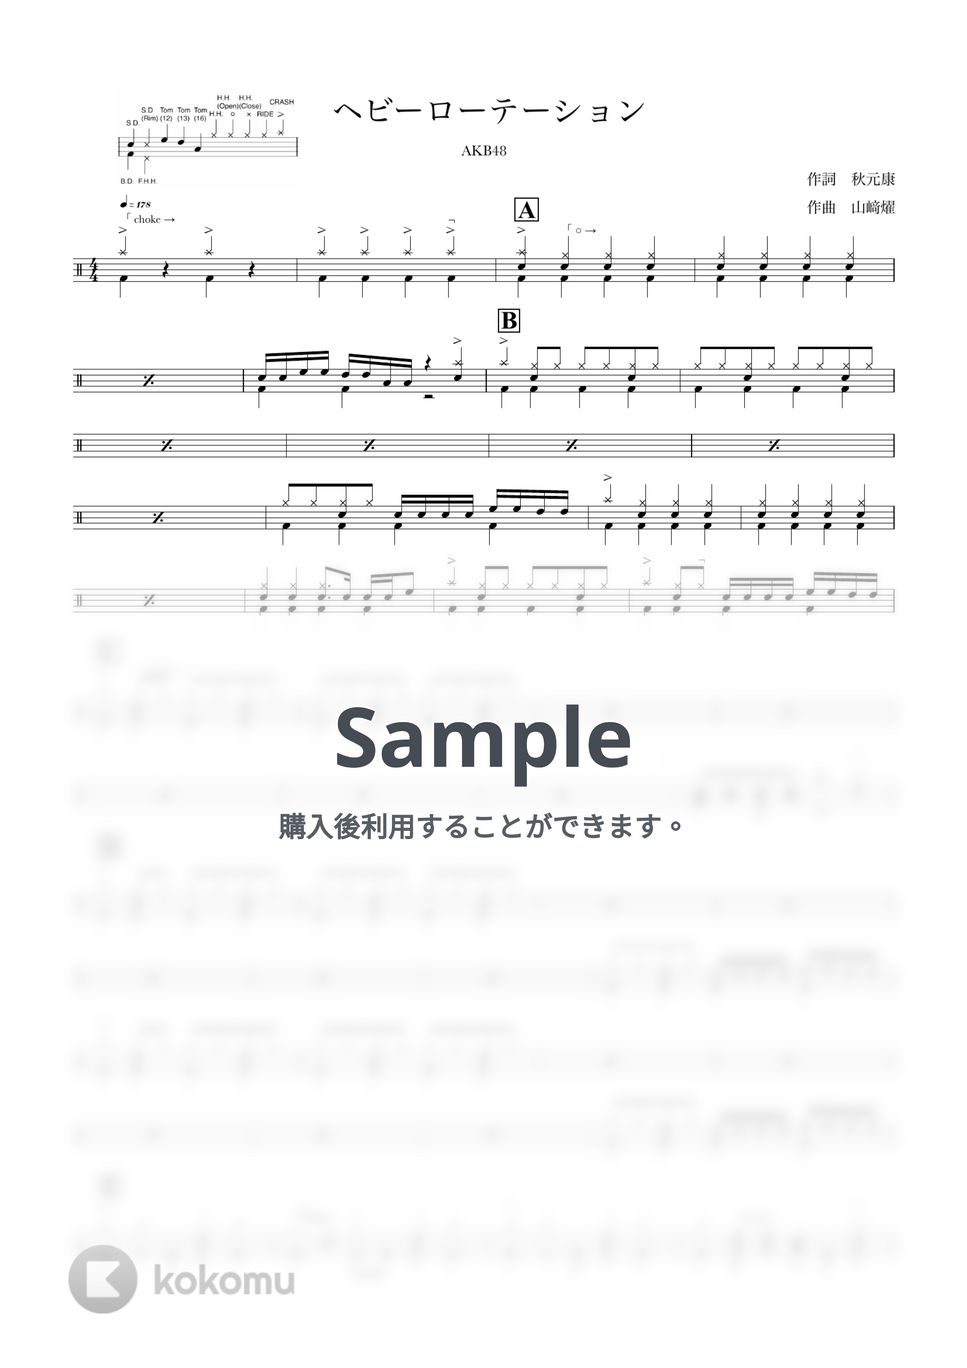 AKB48 - ヘビーローテーション (初心者応援キャンペーン) by ONEDRUMS